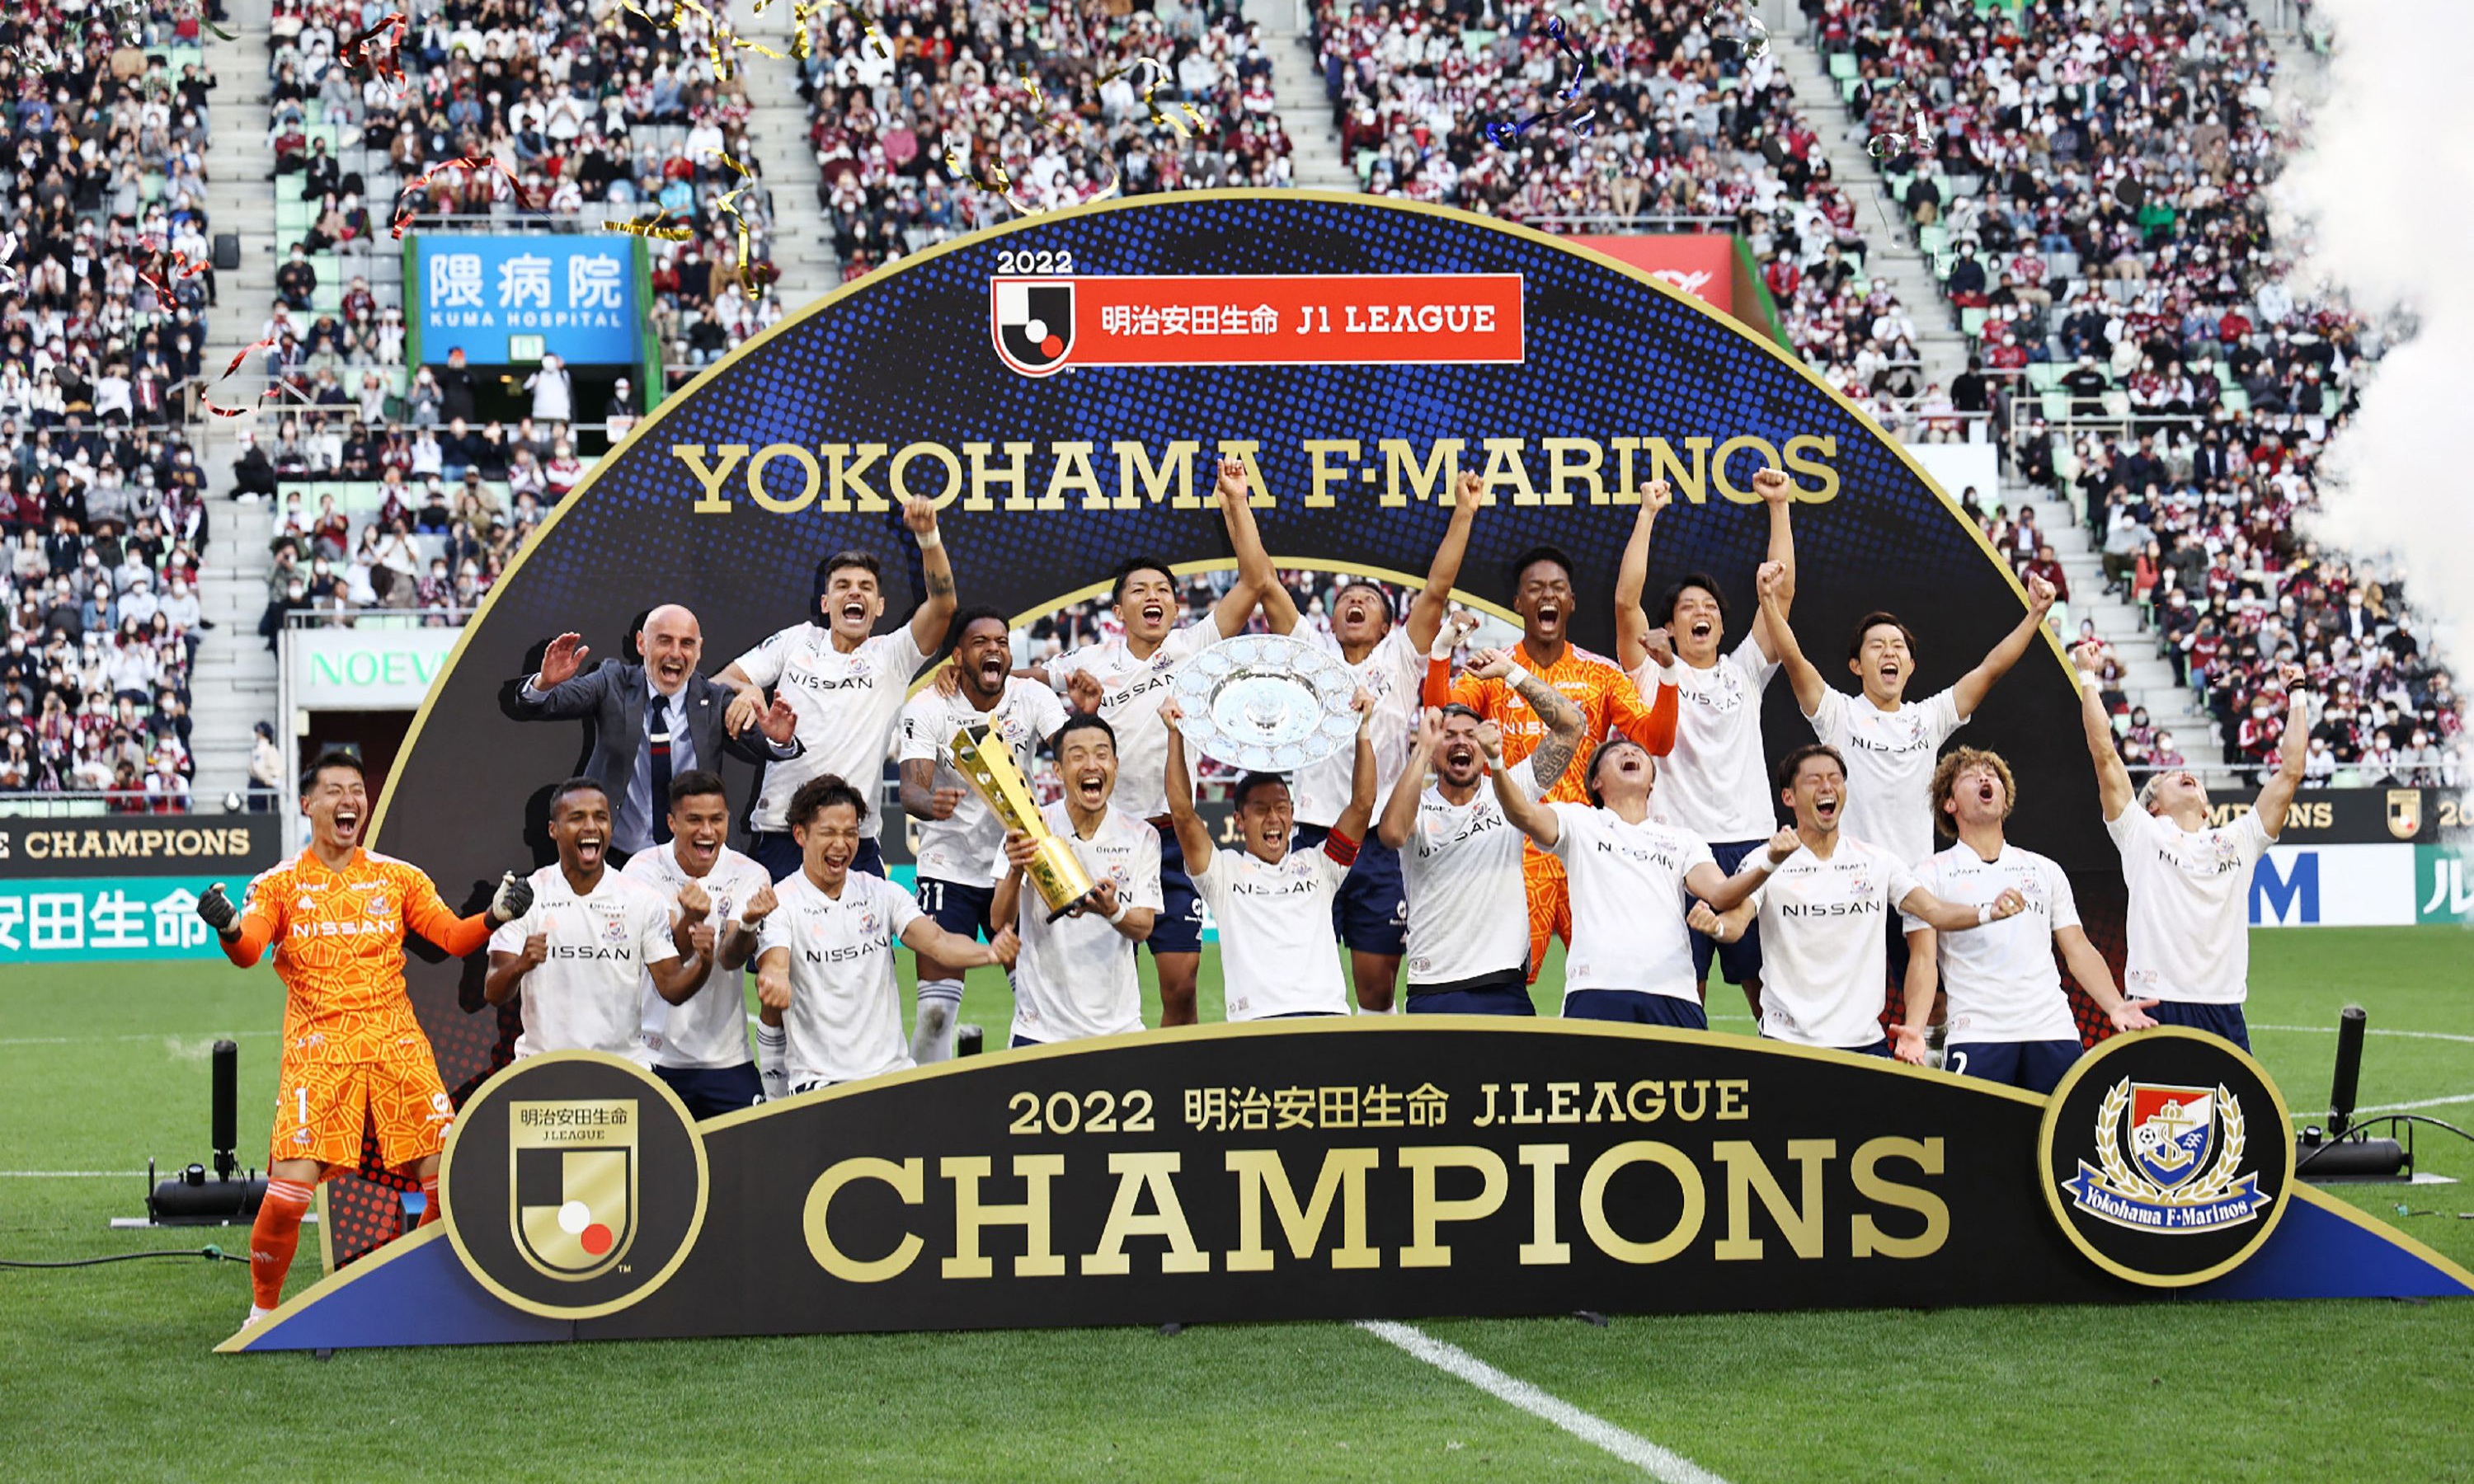 KOBE: Players from Yokohama F Marinos celebrate after taking Japan’s professional J-League football title following their 3-1 victory over Vissel Kobe to put them at the top of the standings on November 5, 2022. — AFP